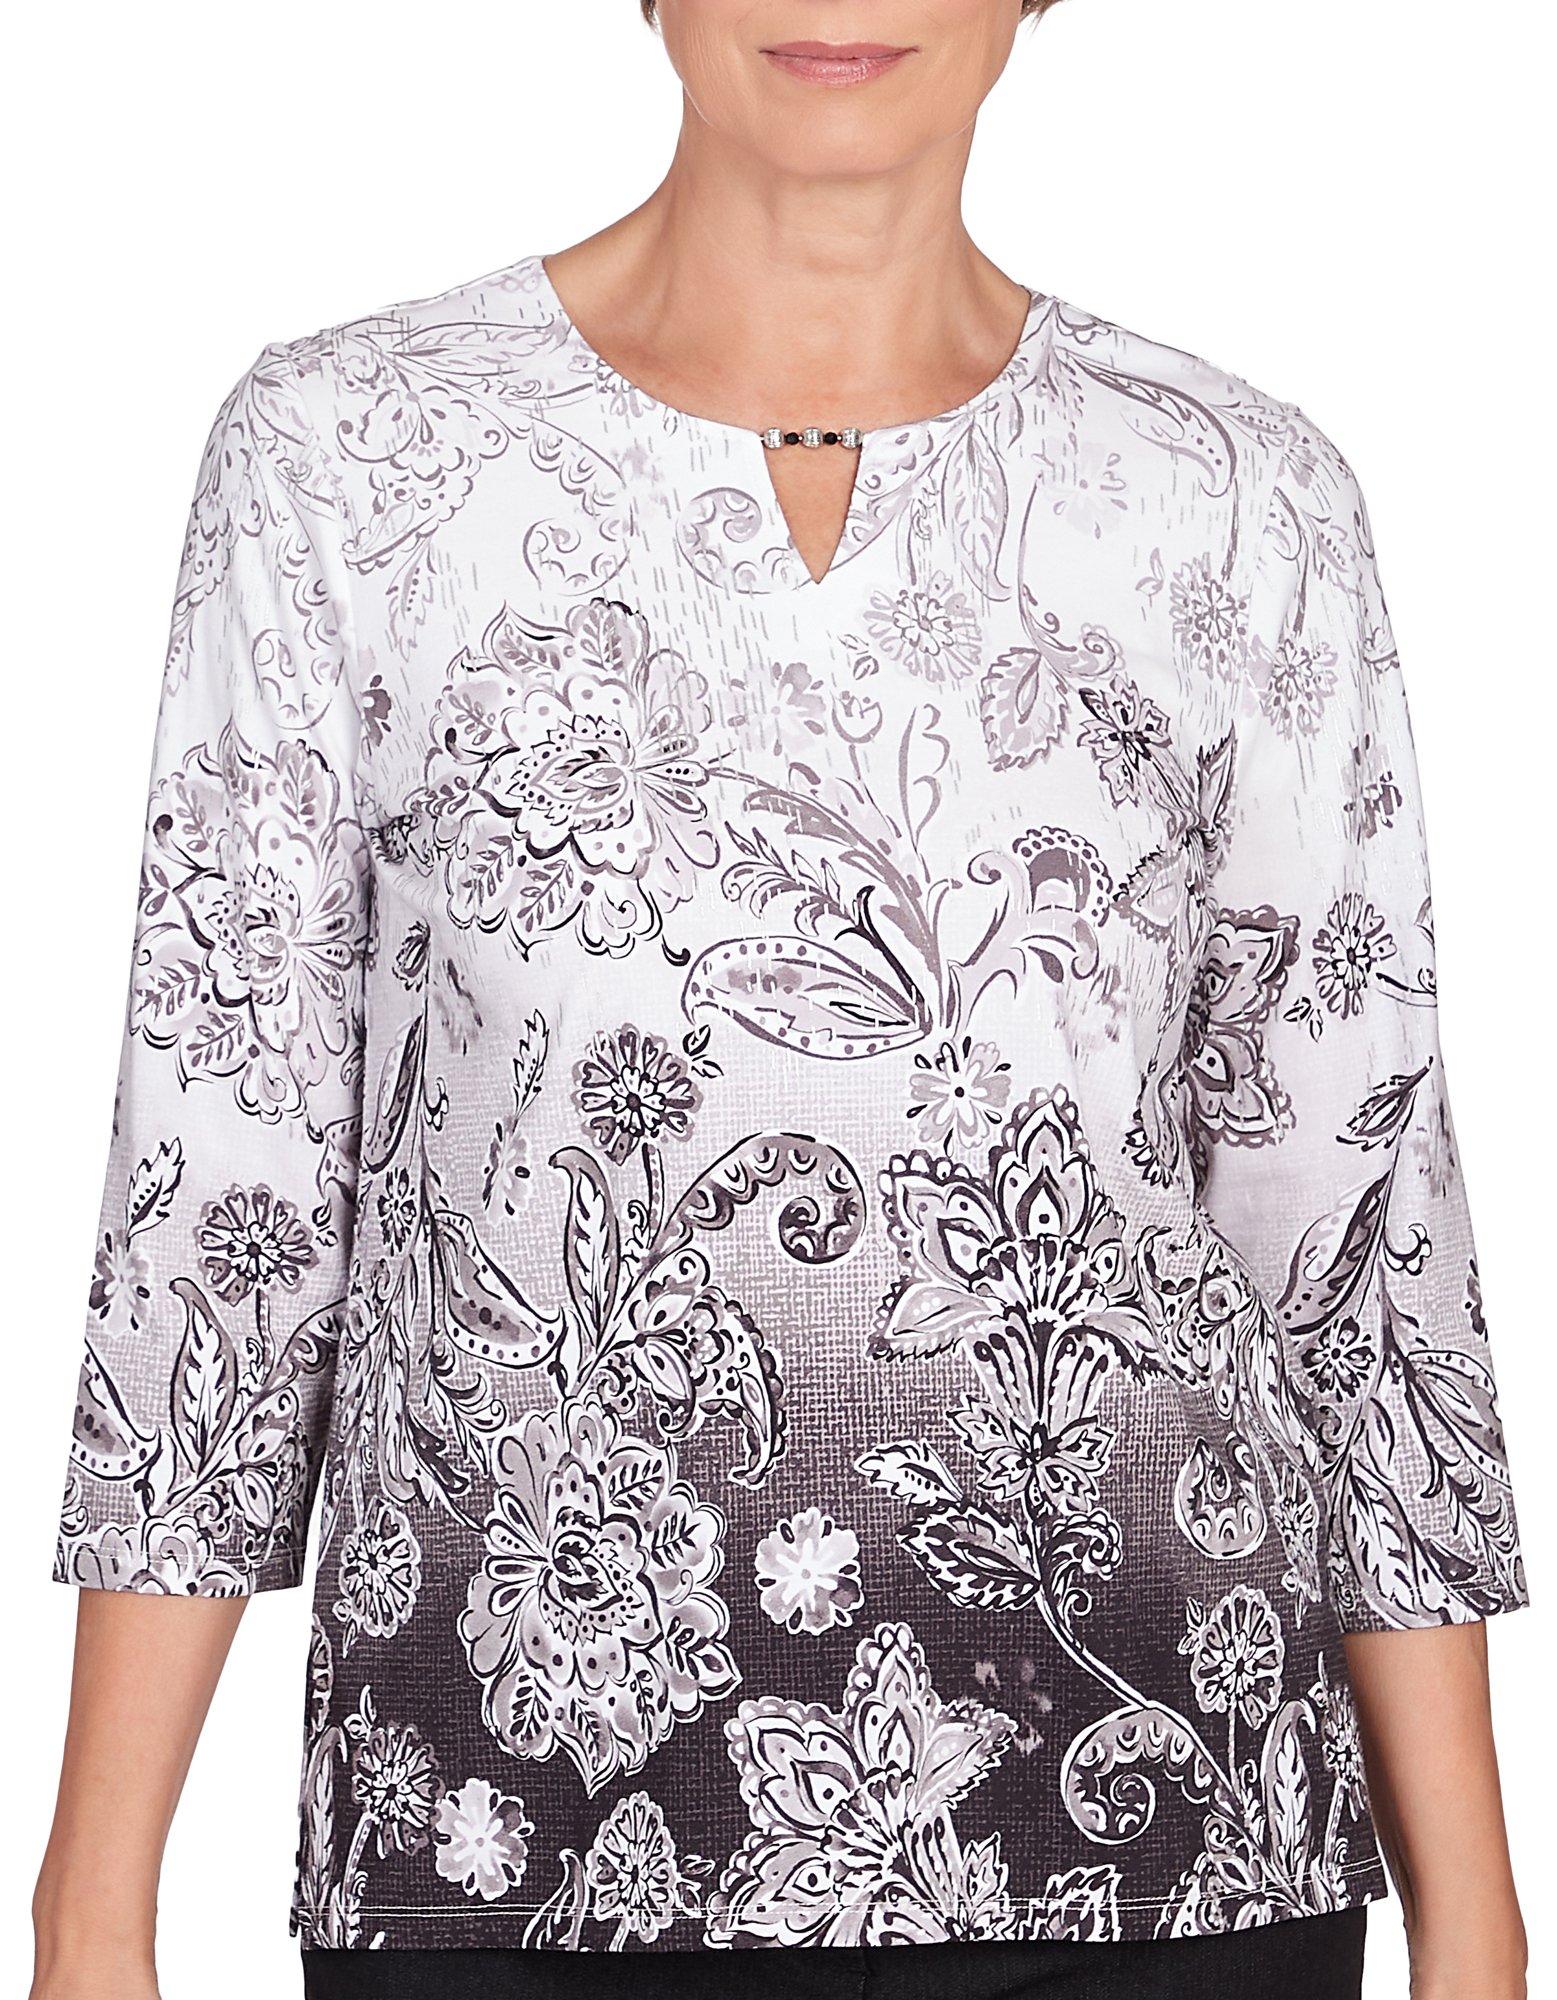 Alfred Dunner Petite Ombre Scroll Floral Split Neck Top